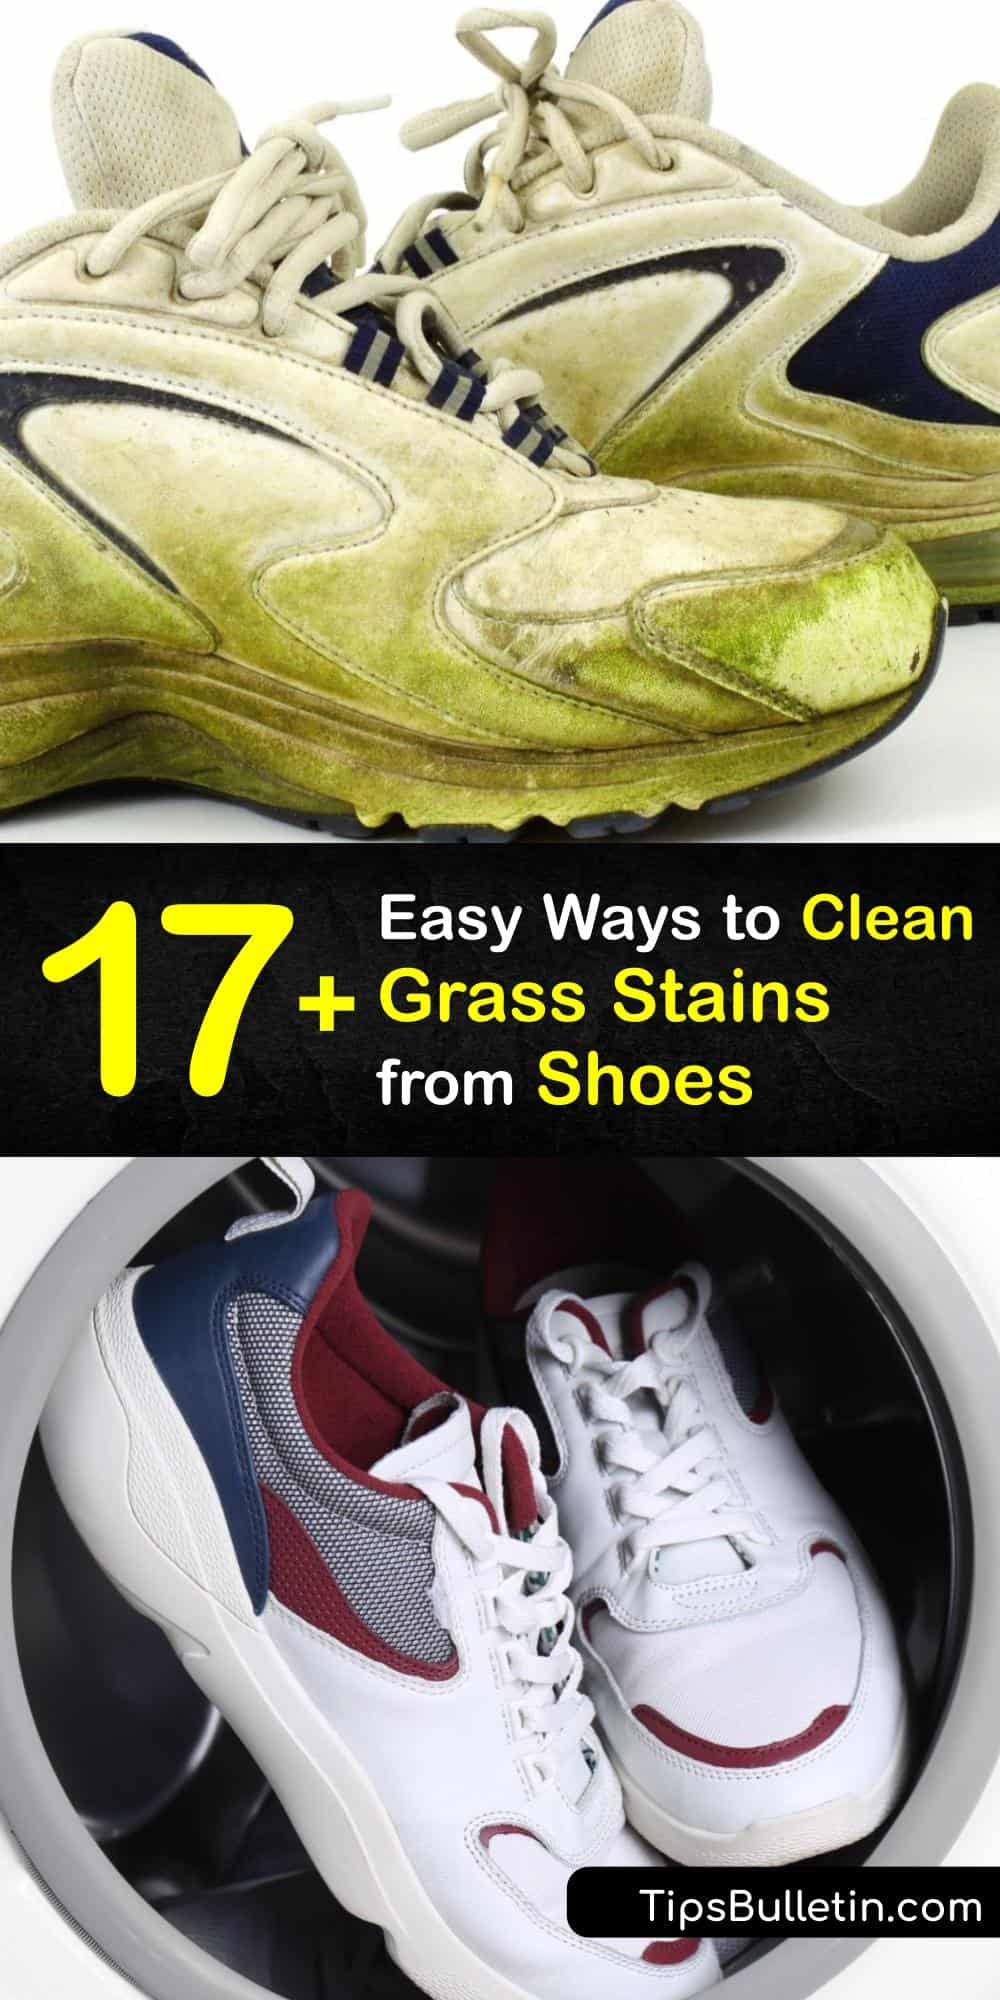 Grass-Stained Shoe Problems - Removing Grass Stains from Shoes